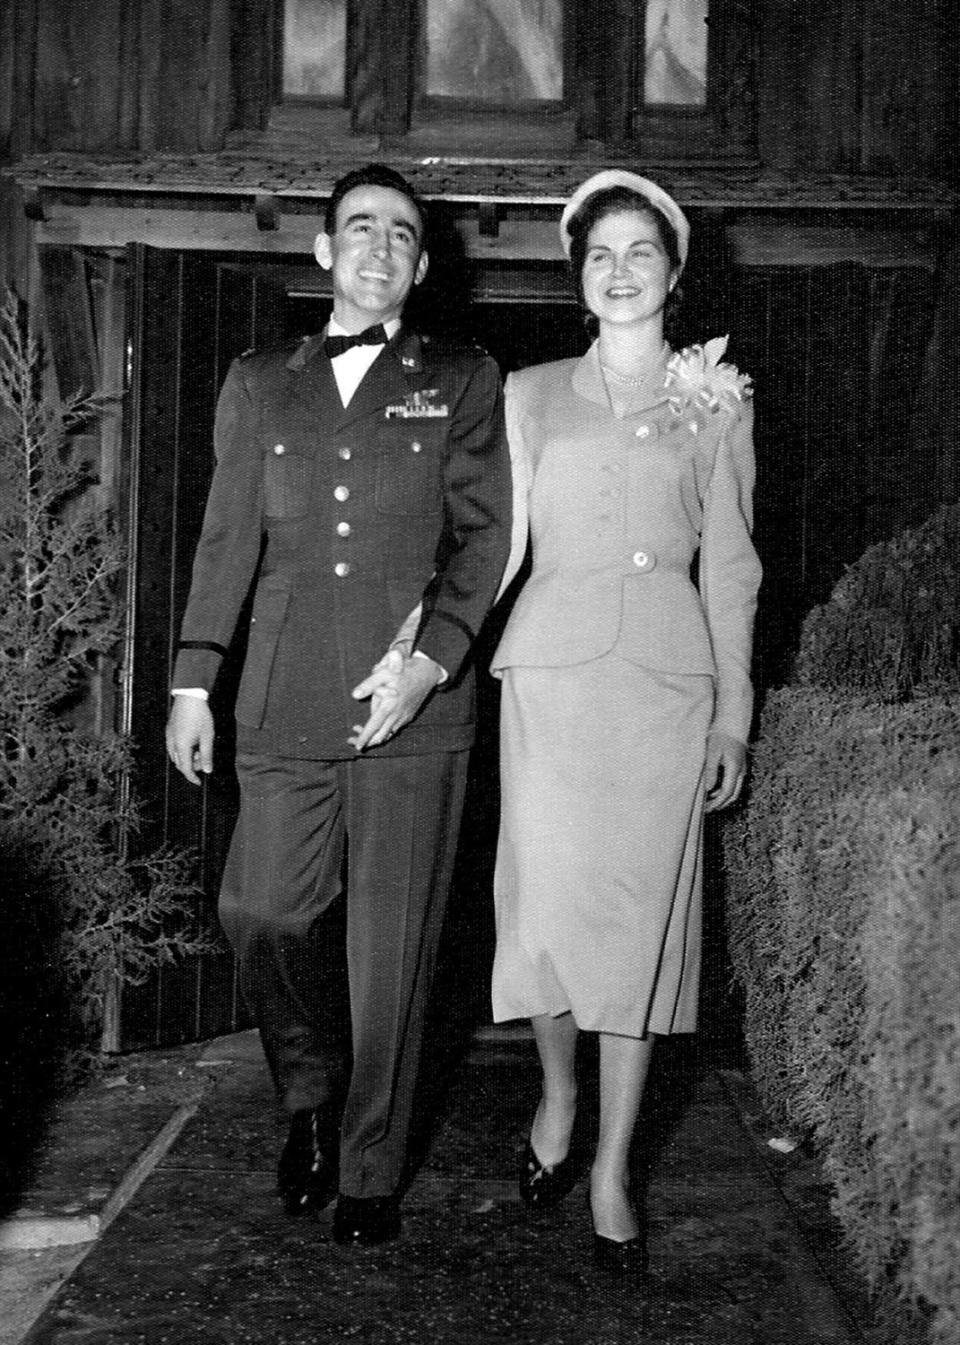 Jim and Edna Marantos on their wedding day in March 1954.